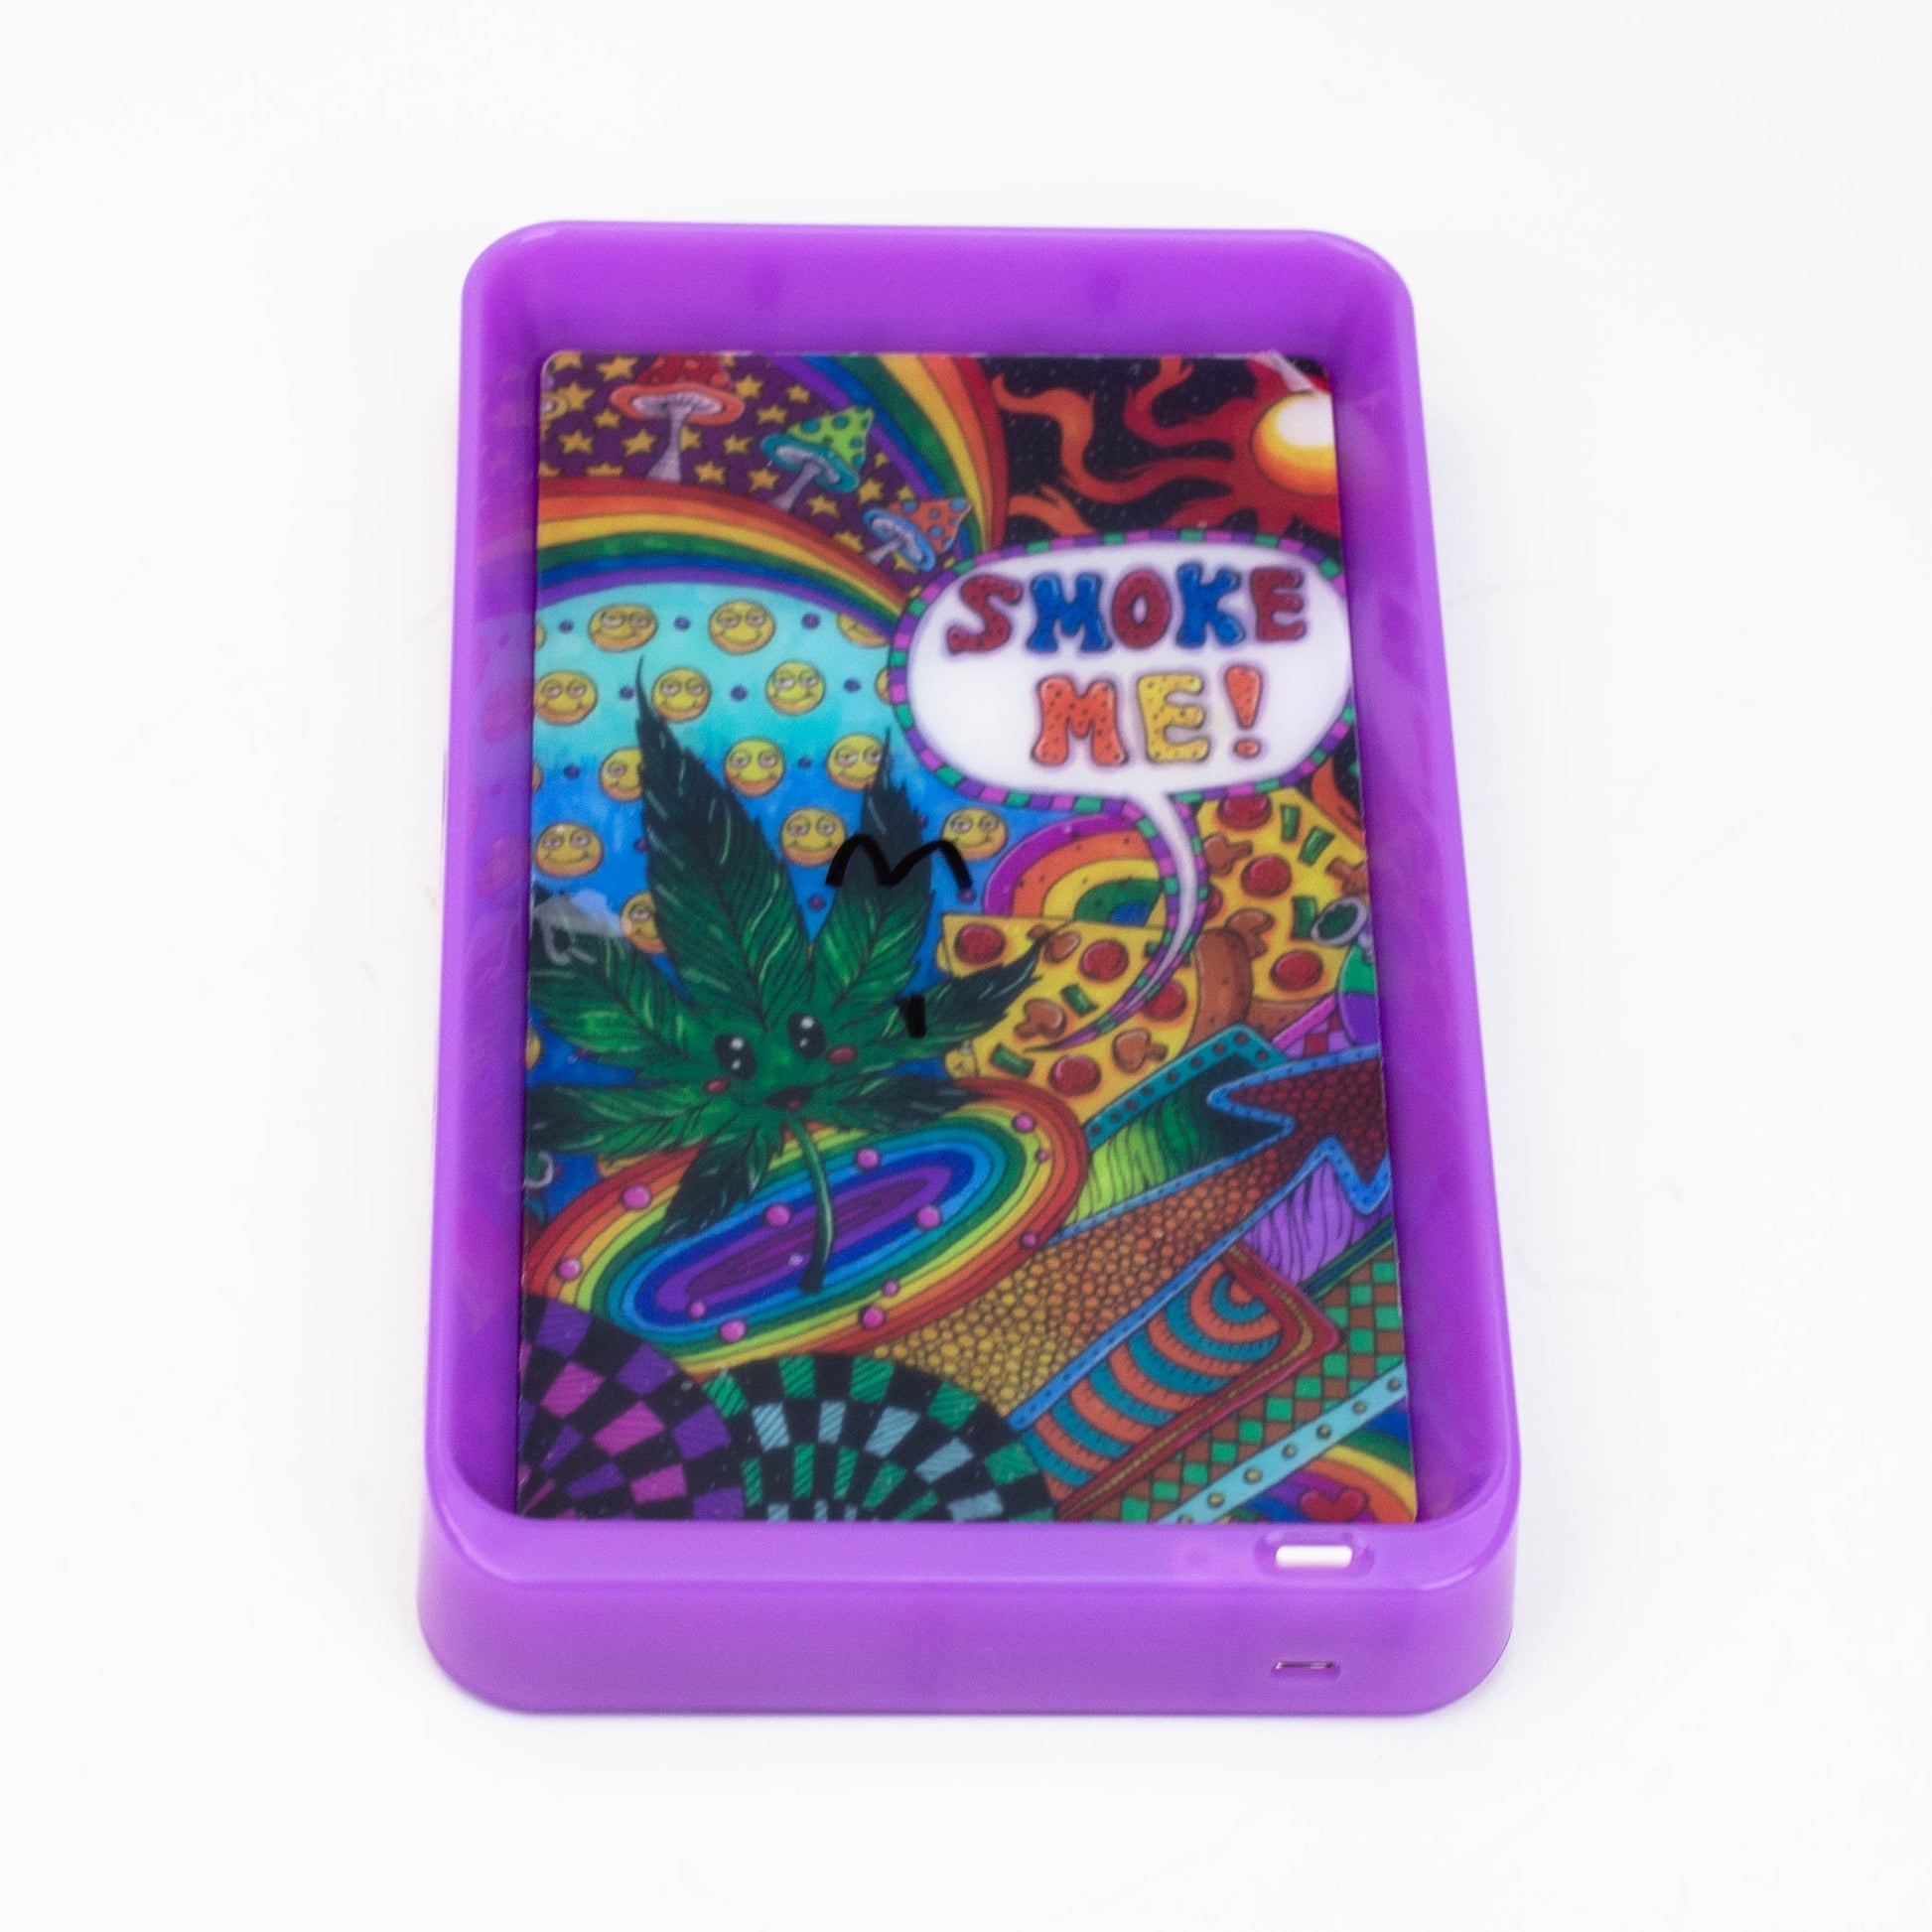 Character 7 Changeable colours LED Rolling Tray_13